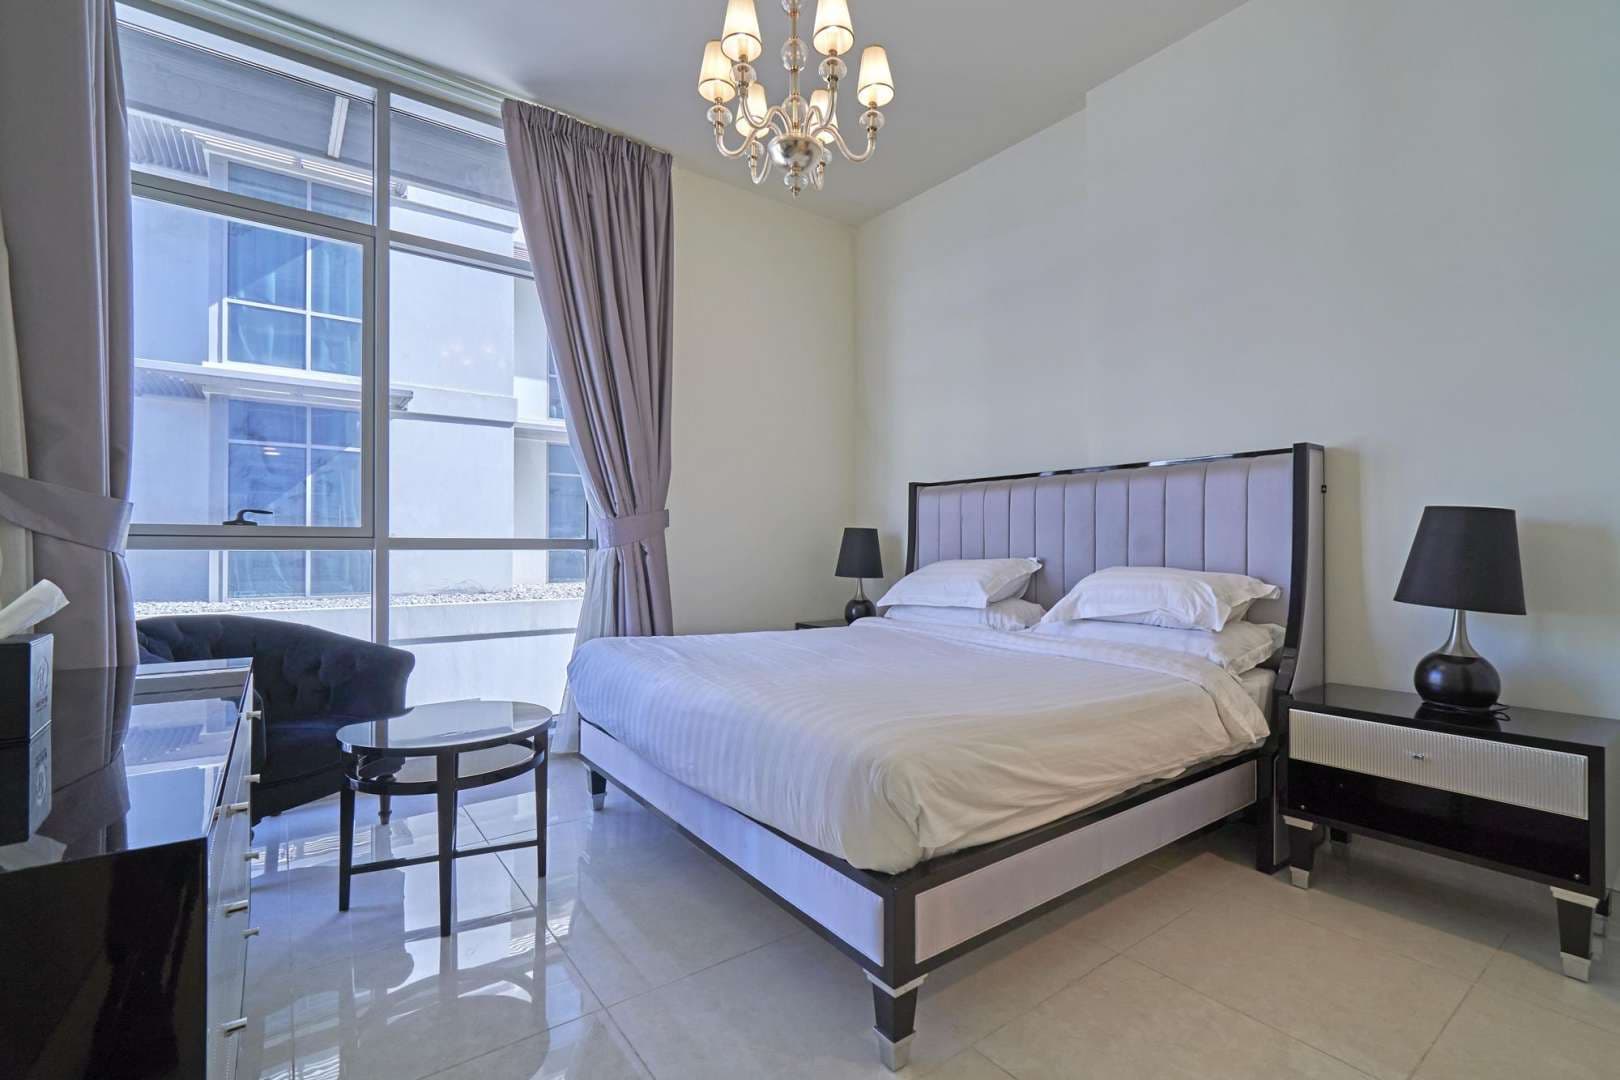 2 Bedroom Apartment For Rent The Polo Residence Lp05455 22aa71d27ac1d800.jpg